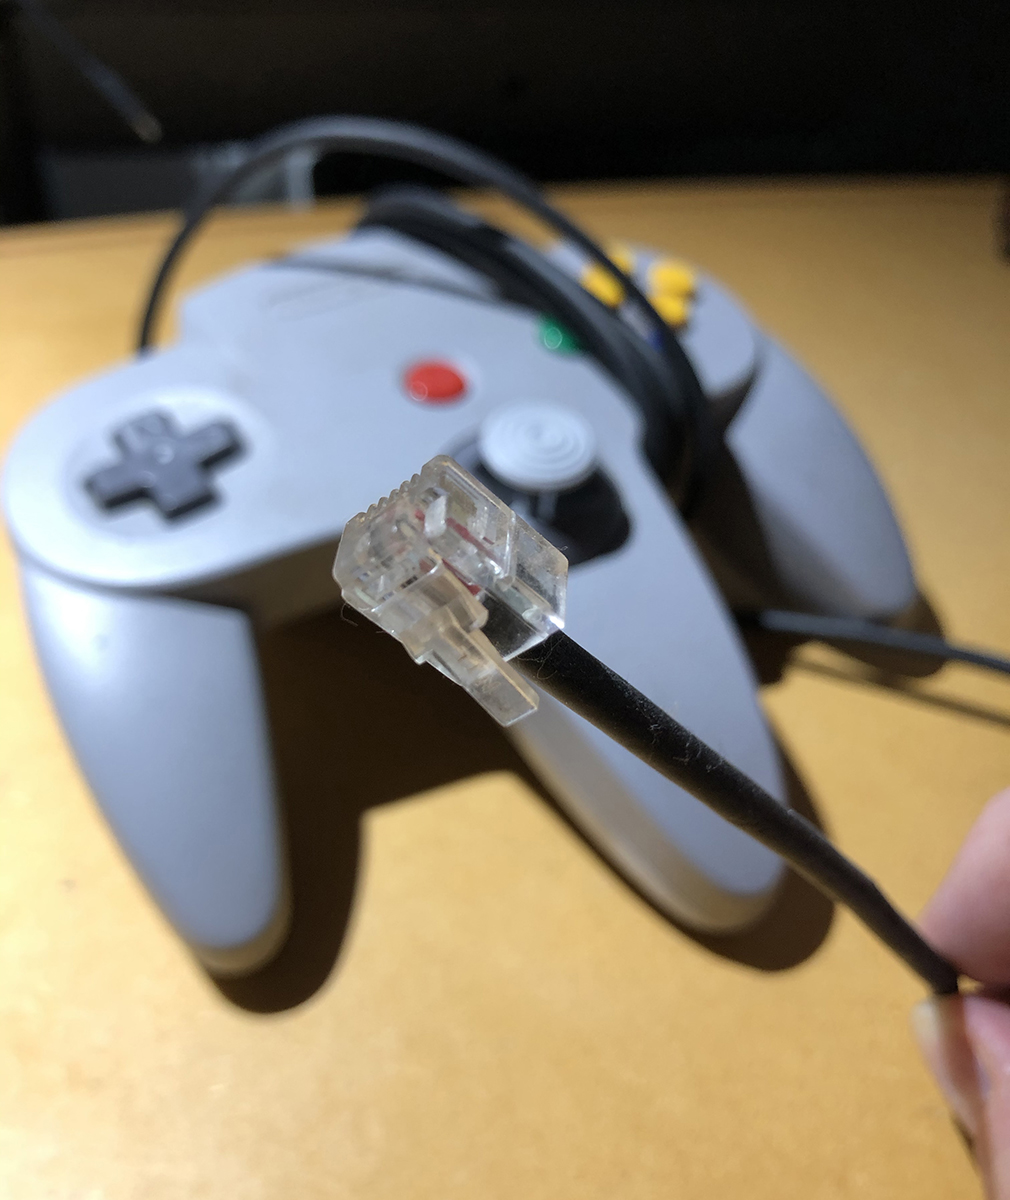 Here is a dev controller with that RJ11 connector.  #gamedev  #nintendo  #n64